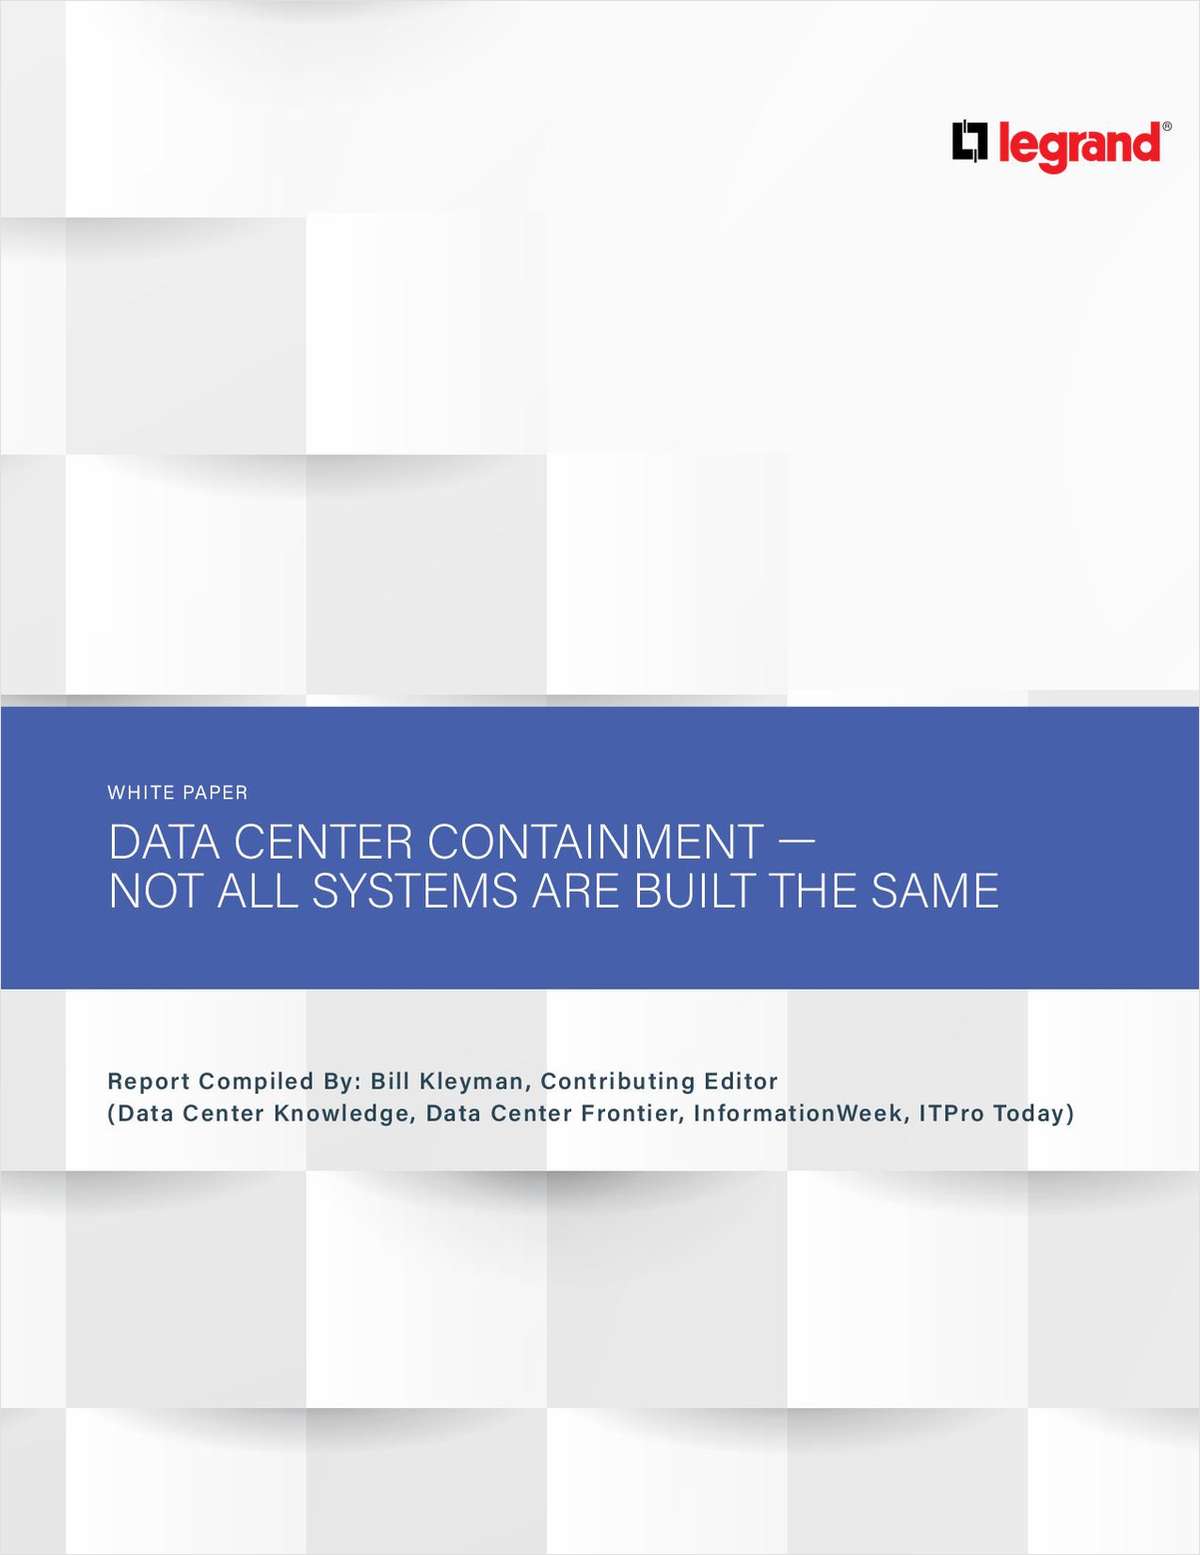 Data Center Containment - Not All Systems Are Built The Same